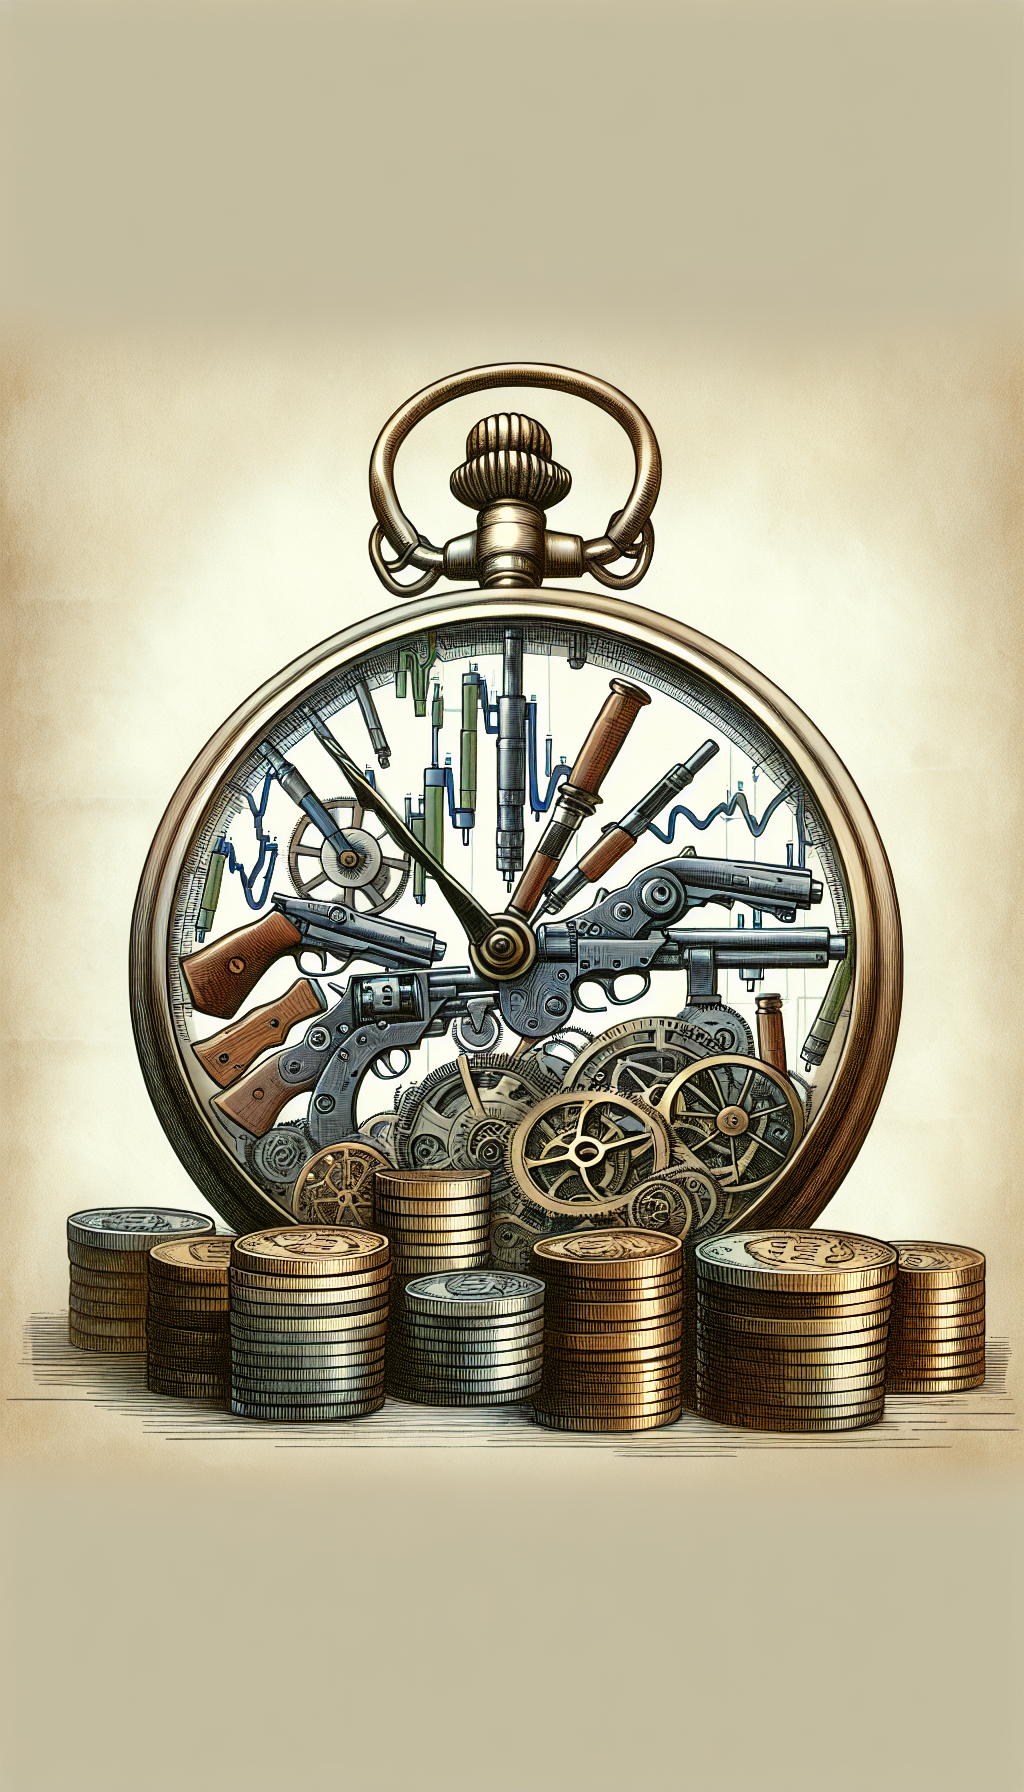 An antique pocket watch with its hands spinning rapidly rests on a stock market graph, with lines resembling the fluctuating value of antique guns. The gears of the watch morph into coin stacks of various heights. Each coin features engravings of different eras' antique firearms, symbolizing their changing values over time. The drawing style transitions from precise, mechanical linework to looser, watercolor-like shading.